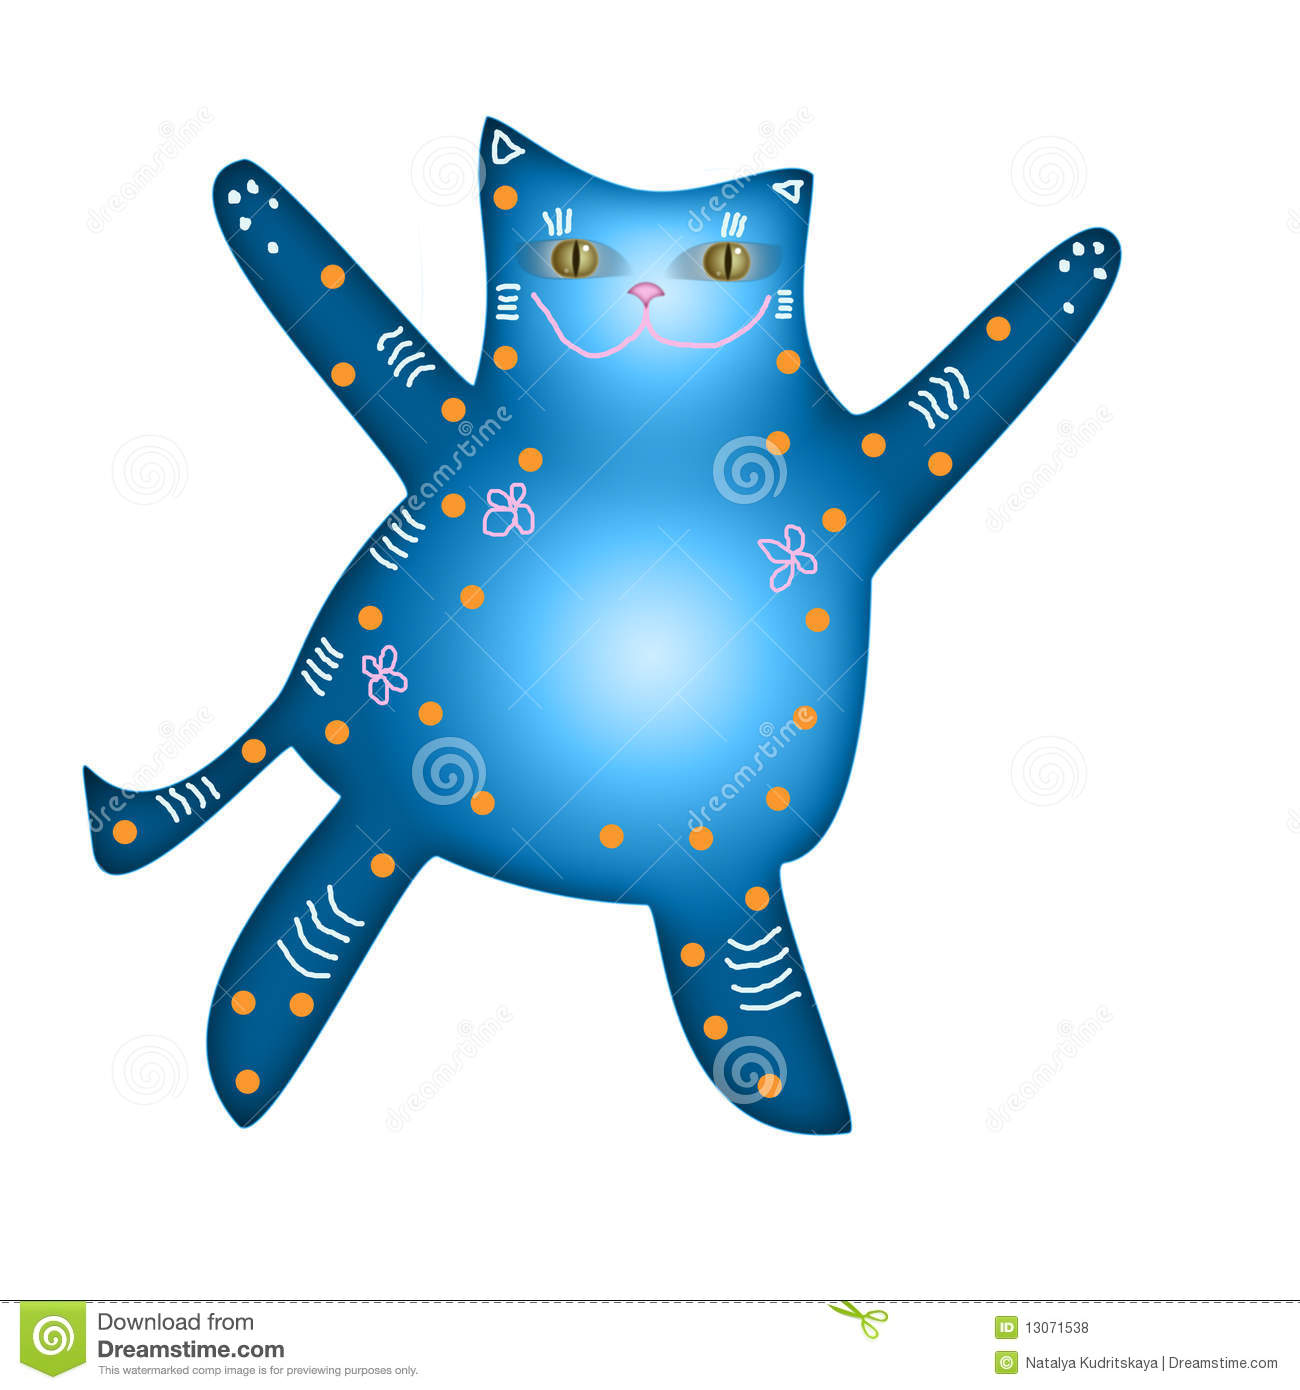 Cat For Congratulations Royalty Free Stock Photos   Image  13071538